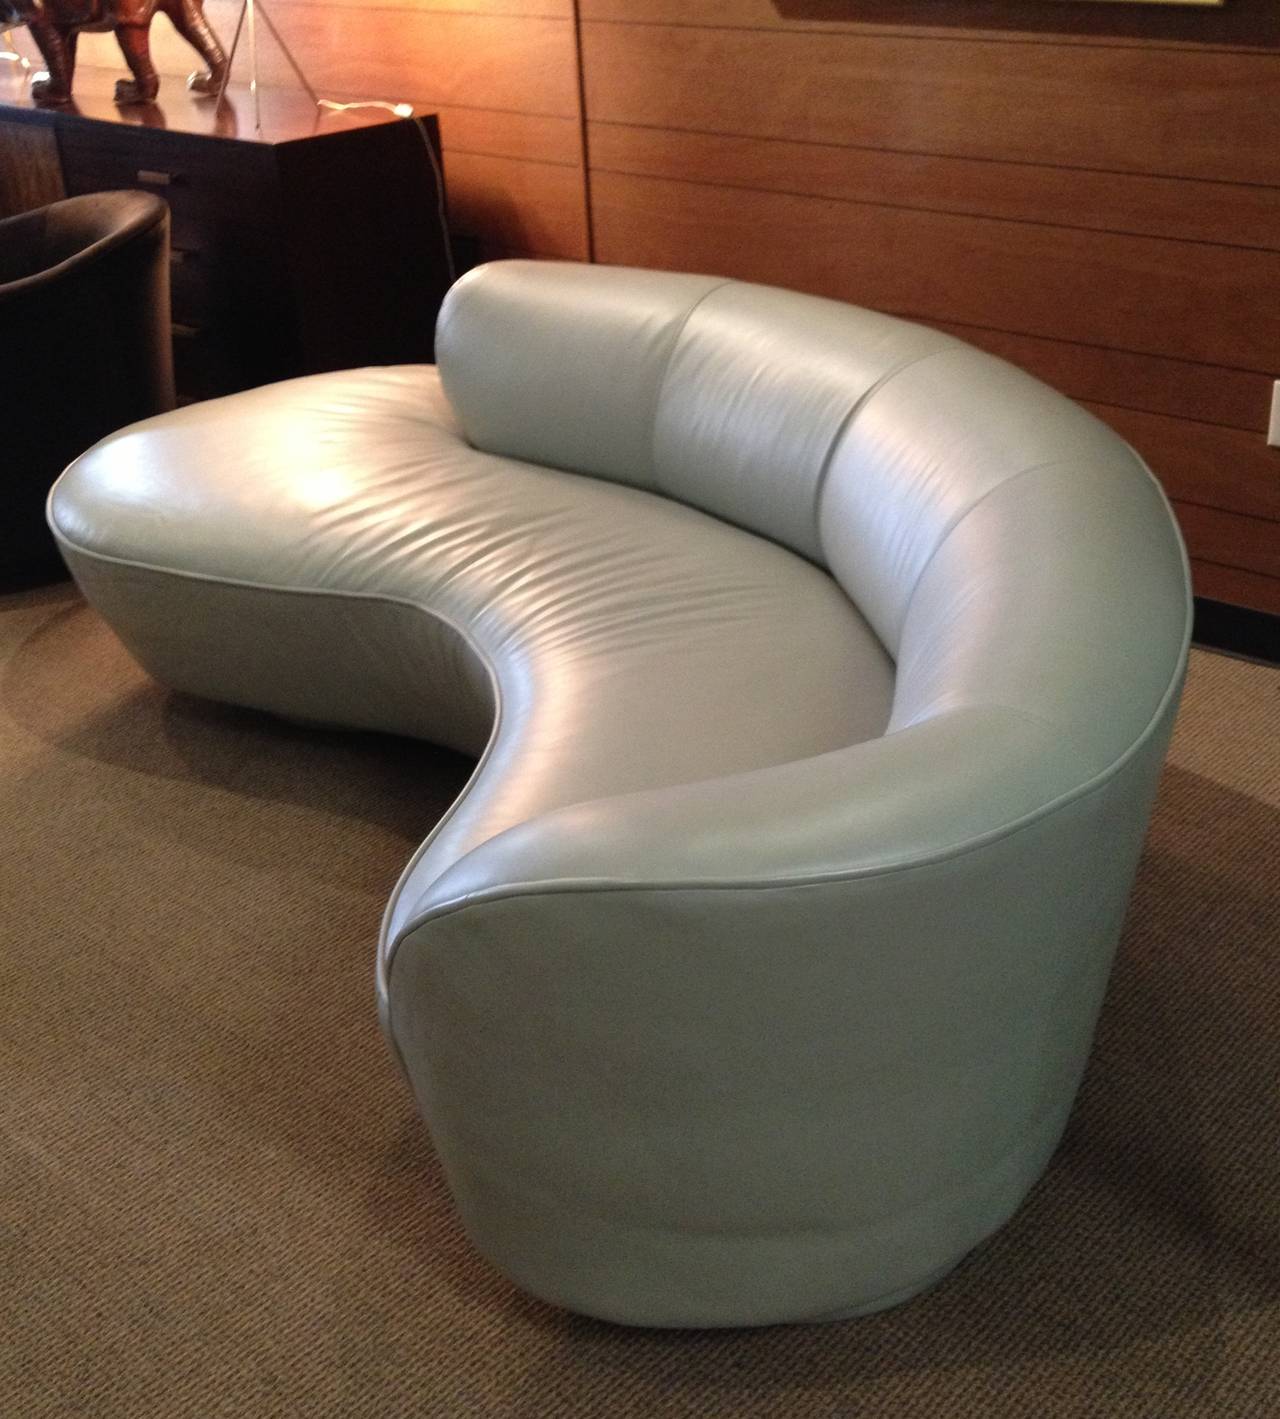 Stunning serpentine sofa designed by Vladimir Kagan and manufactured by Directional Inc.
The sofa and ottoman are upholstered in beautiful sage Eldeman leather and it is very smooth and comfortable.

The sofa is in excellent condition and can be